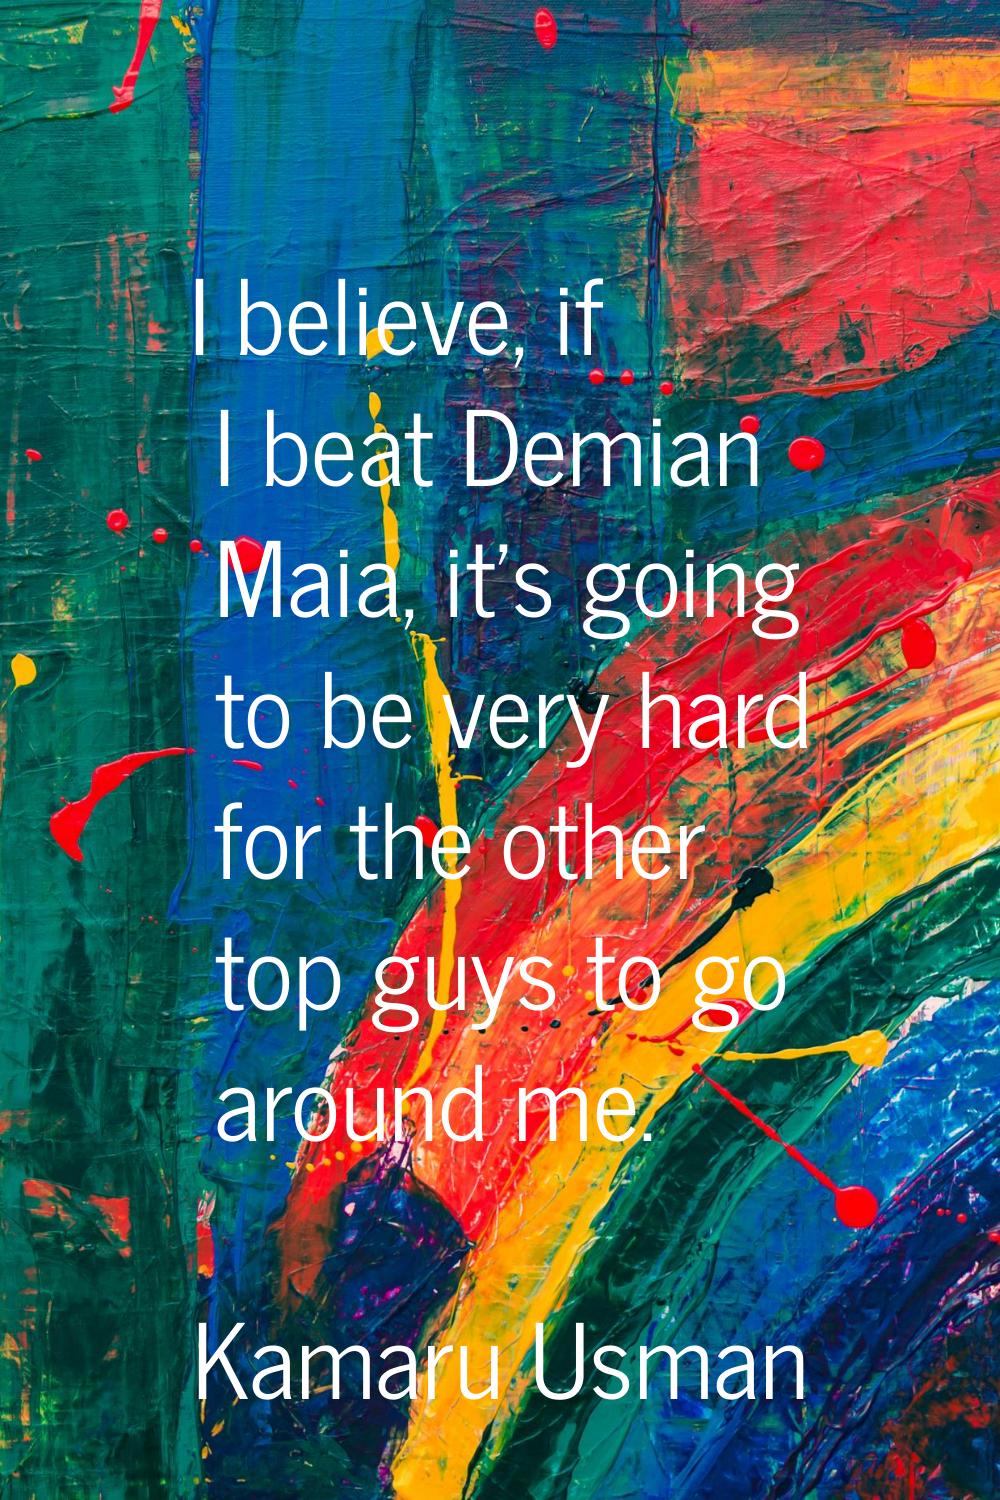 I believe, if I beat Demian Maia, it's going to be very hard for the other top guys to go around me